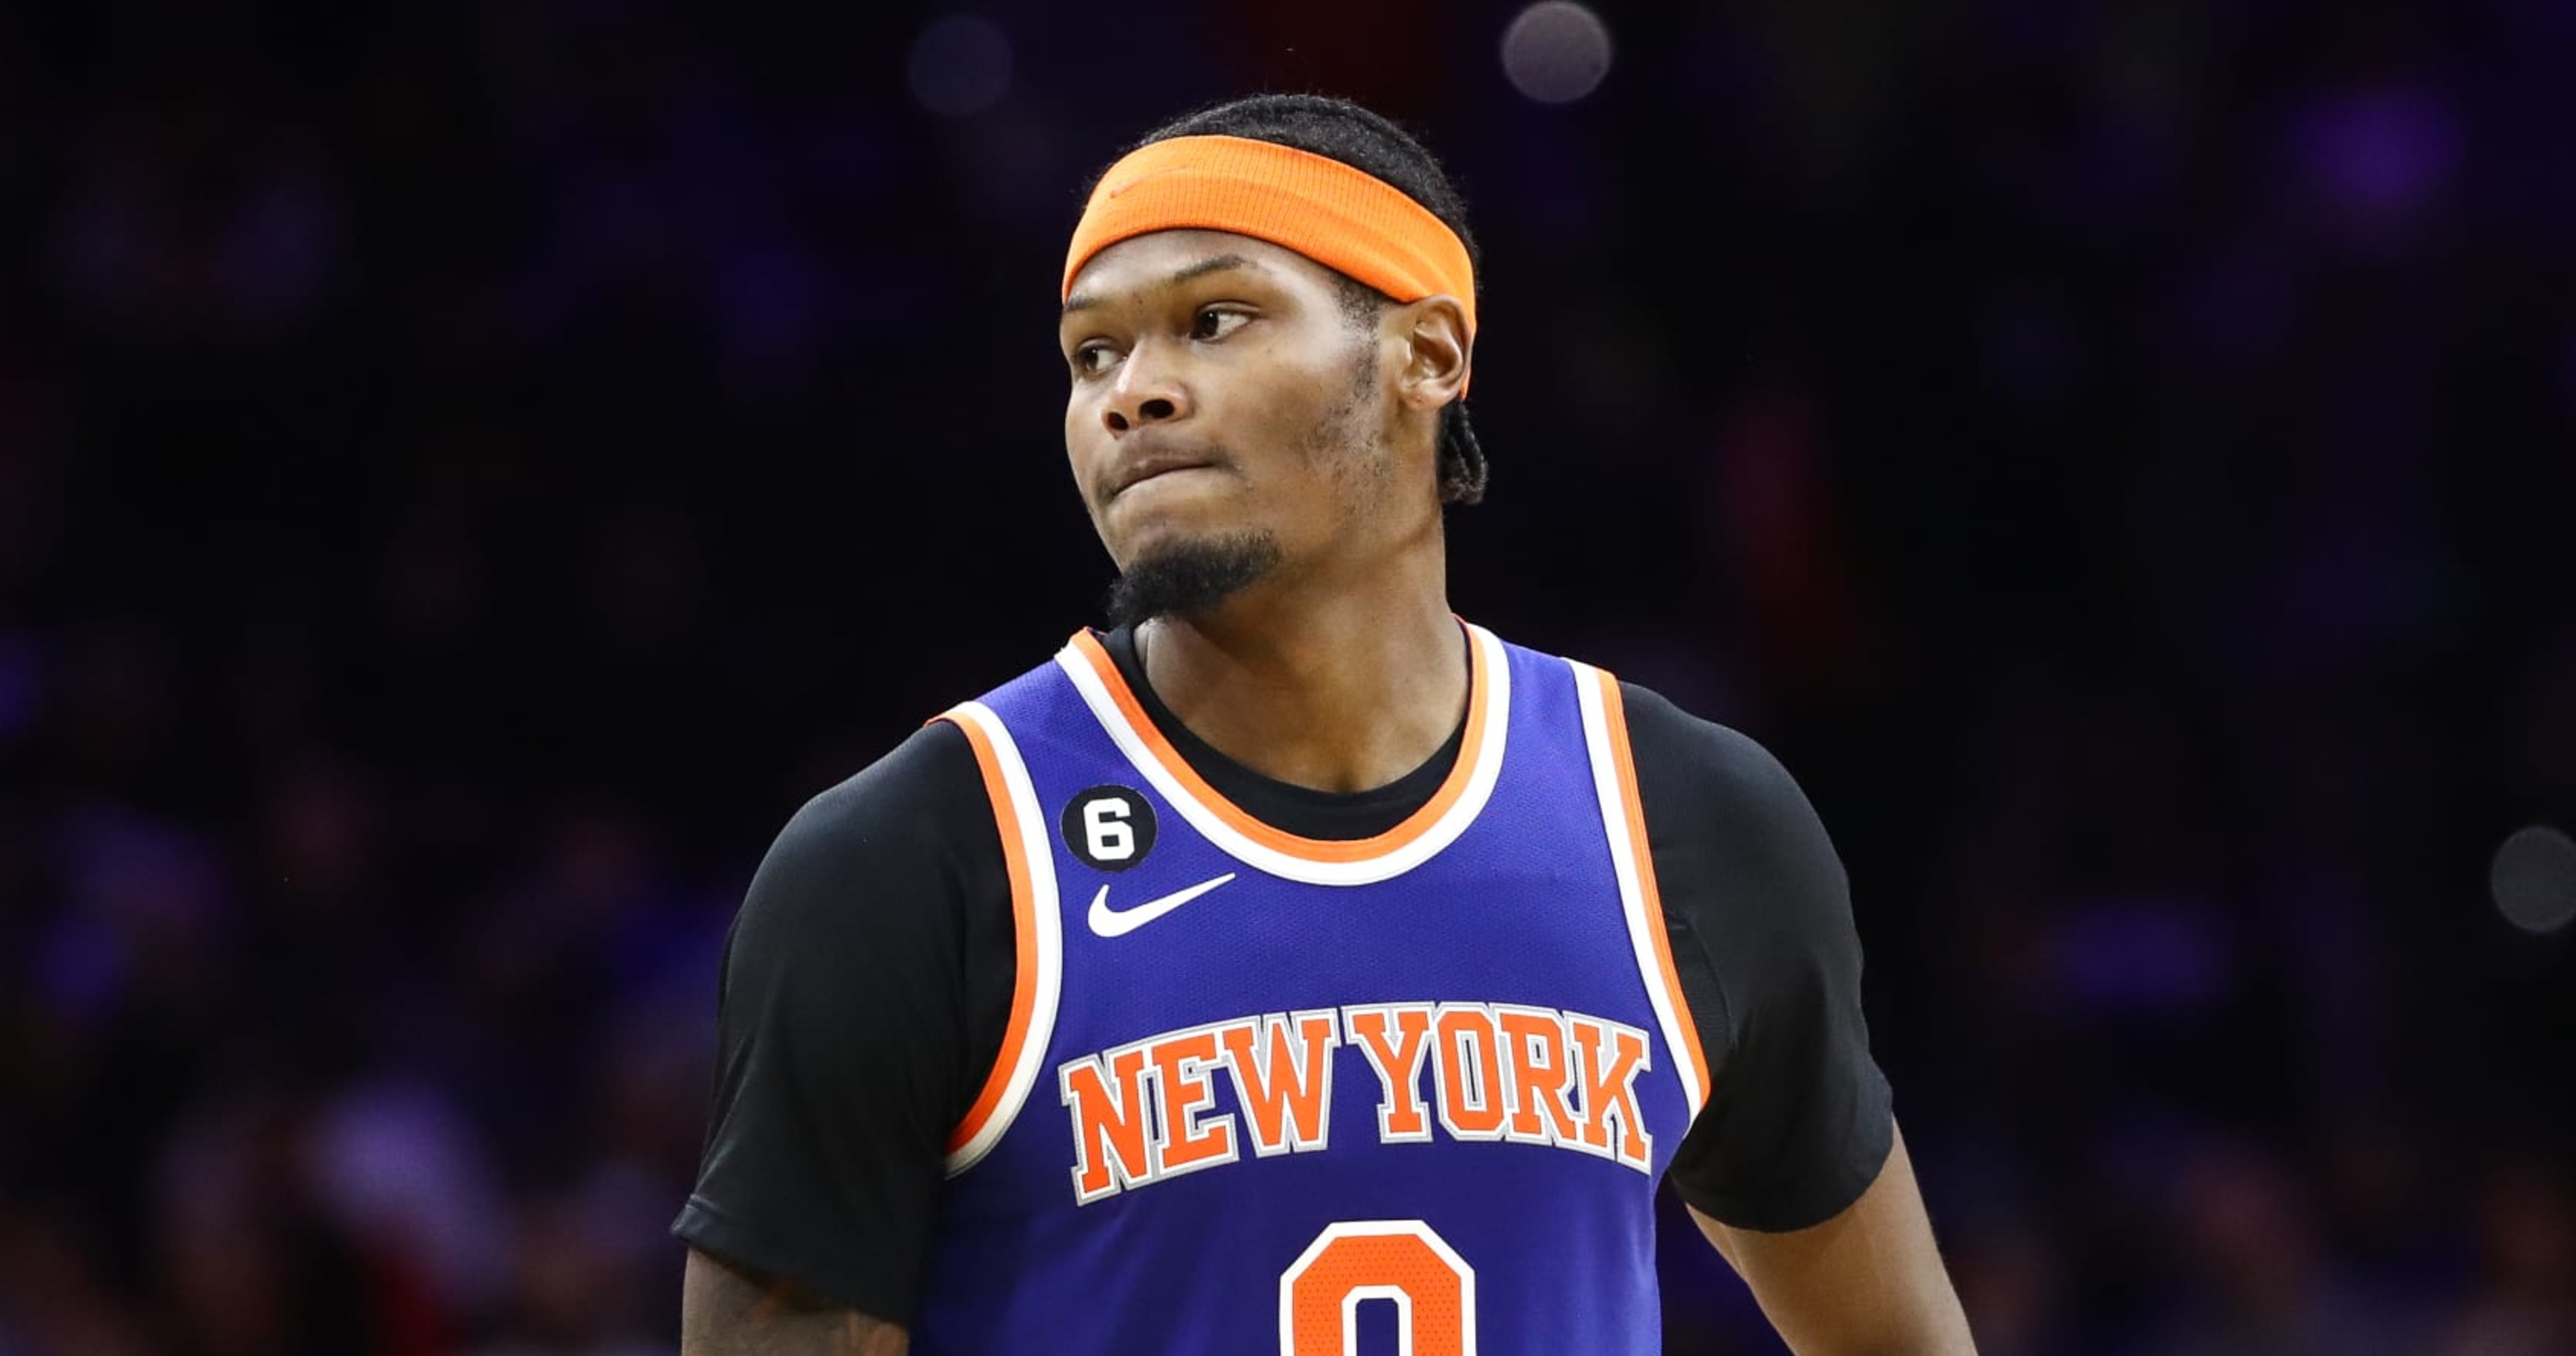 Lakers Rumors: LA 'Very Intrigued' by Knicks' Cam Reddish; NY Wants 1st in Trade